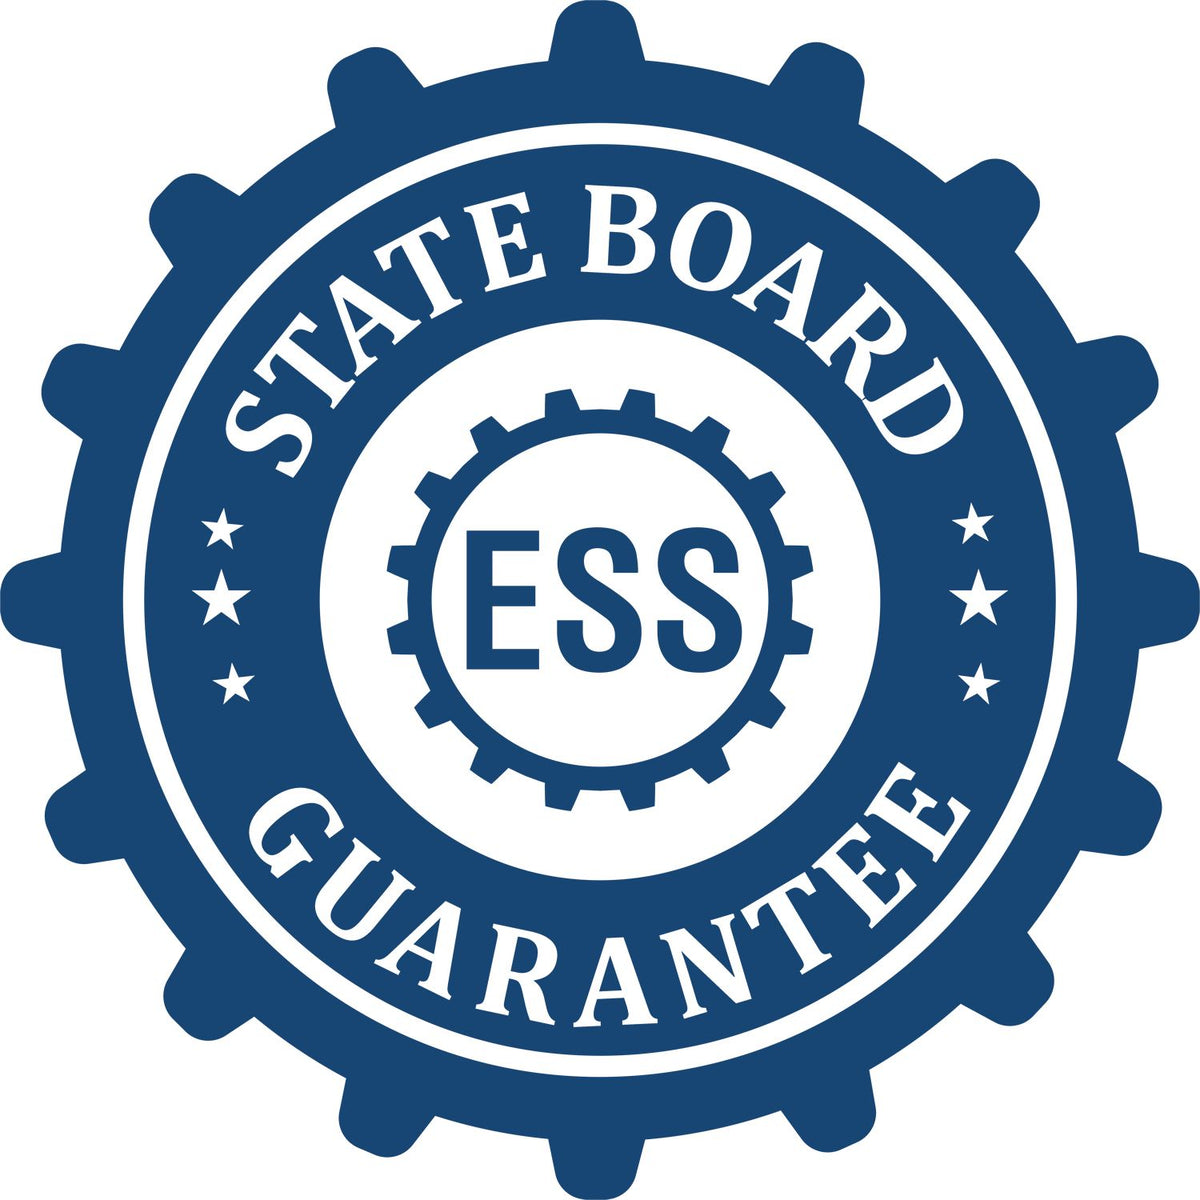 An emblem in a gear shape illustrating a state board guarantee for the State of Minnesota Extended Long Reach Engineer Seal product.